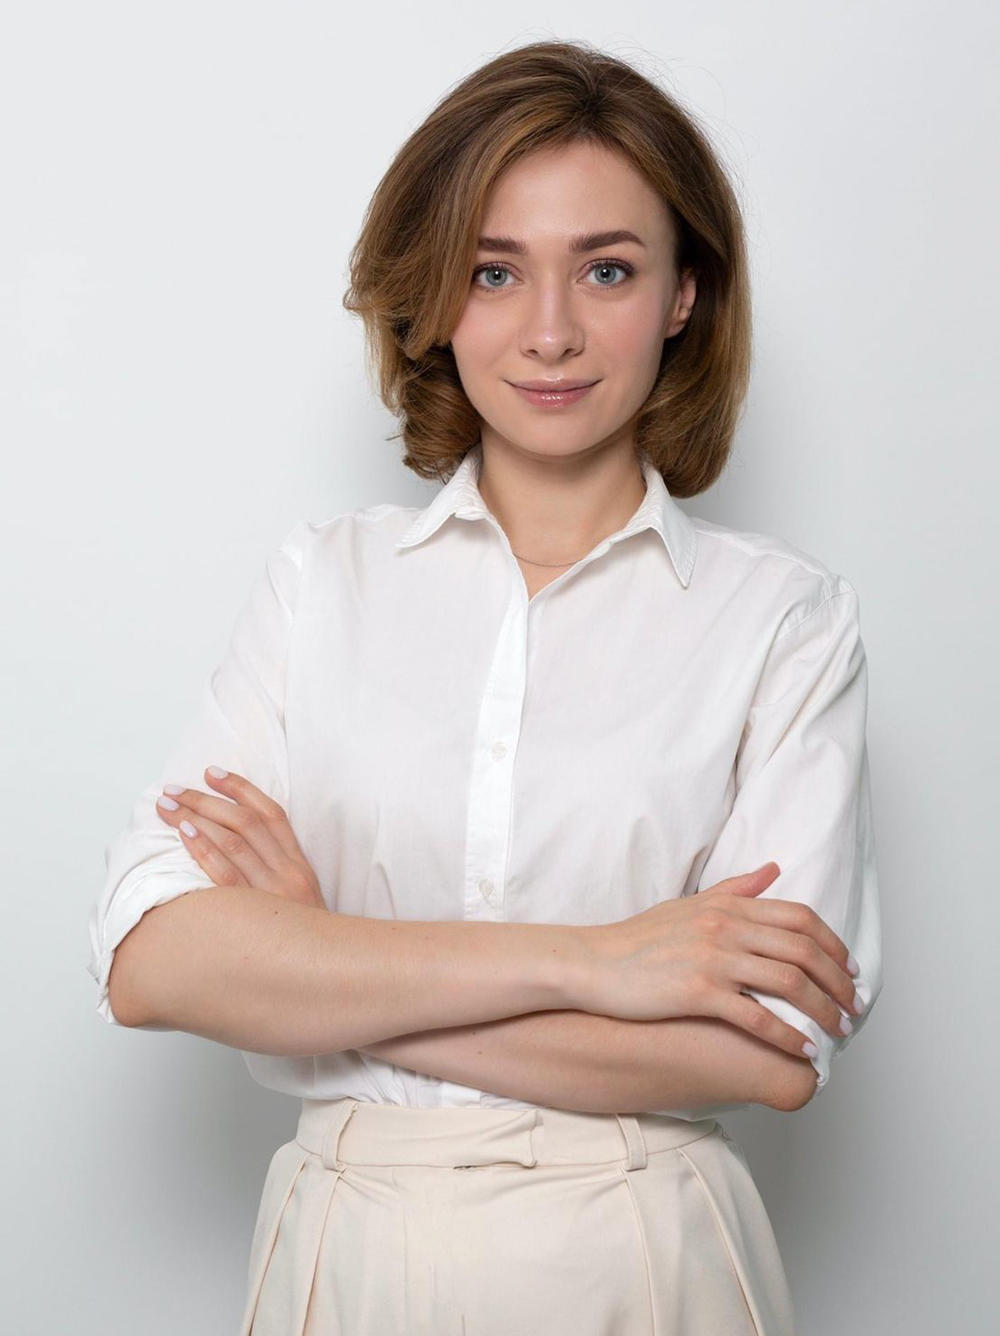 Dr. Aleksandra Shchebet is a neurologist who, until the war broke out, ran a private practice in Kyiv. She helped treat chronic headaches and back pain and also practiced as a psychotherapist.